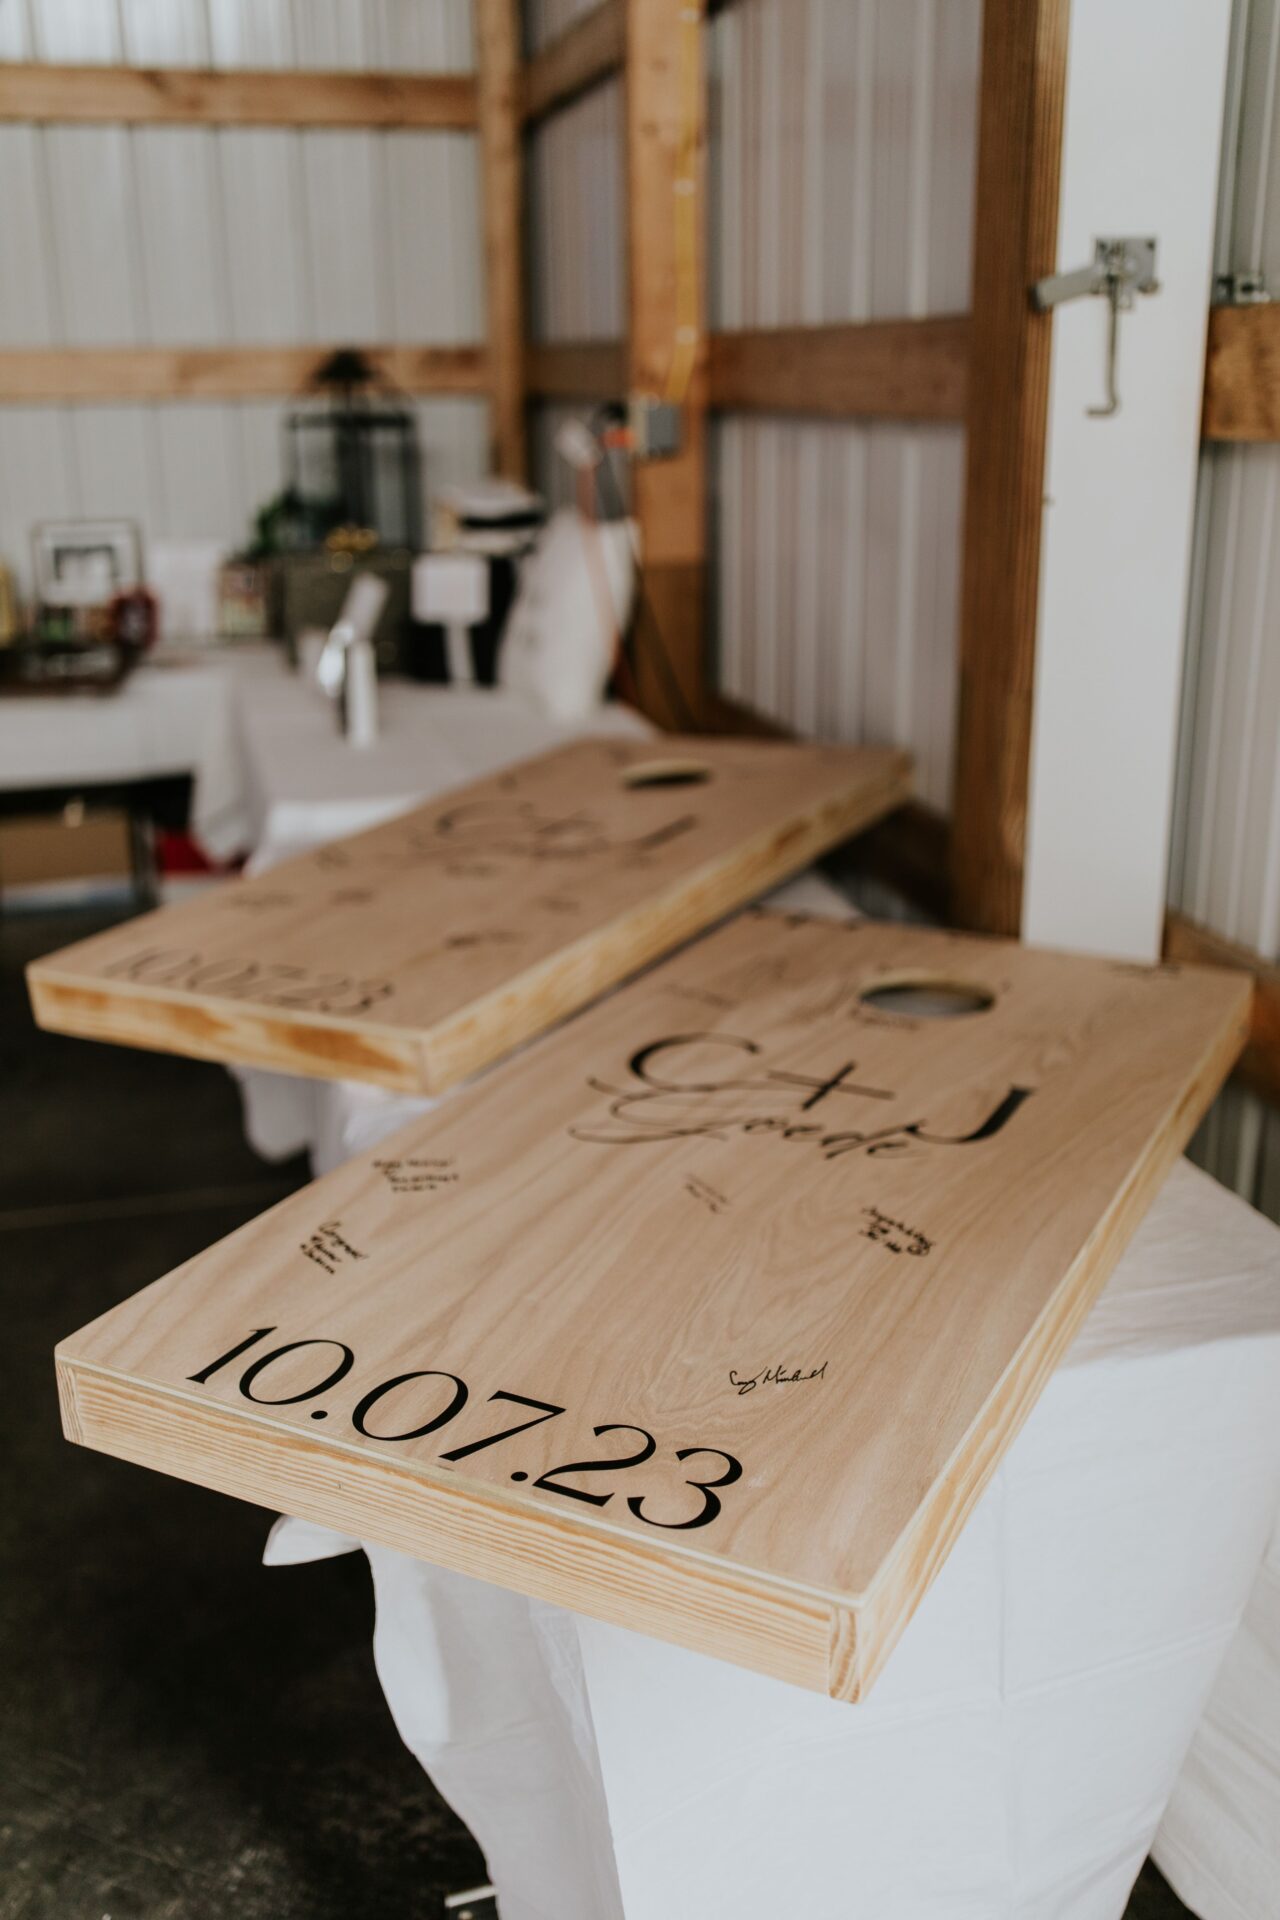 DIY wedding guest book. Customized bags boards on a reception table, being used as a wedding gustbook.